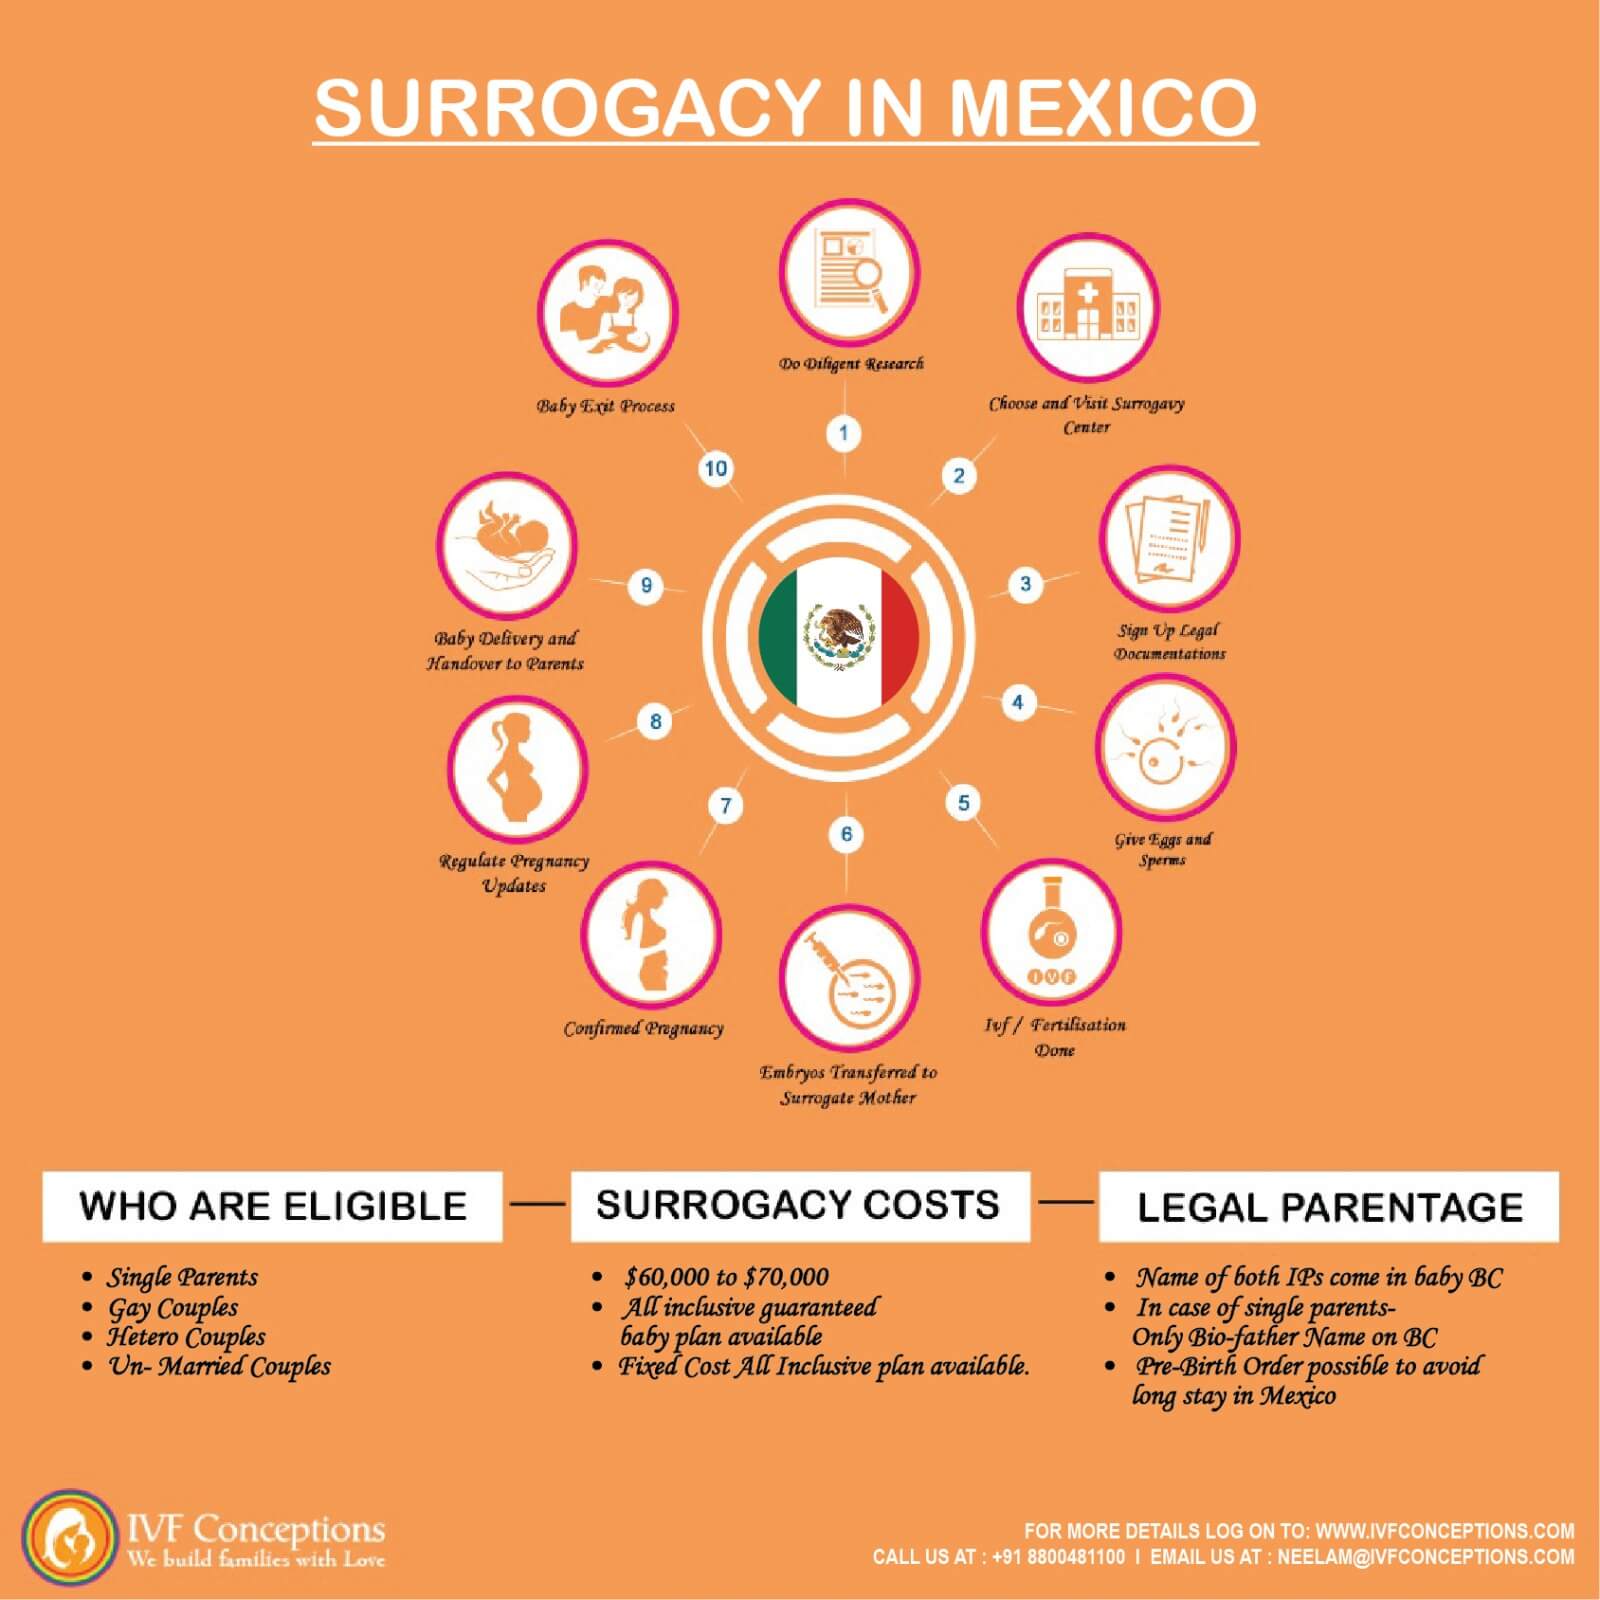 Surrogacy in Mexico is legal